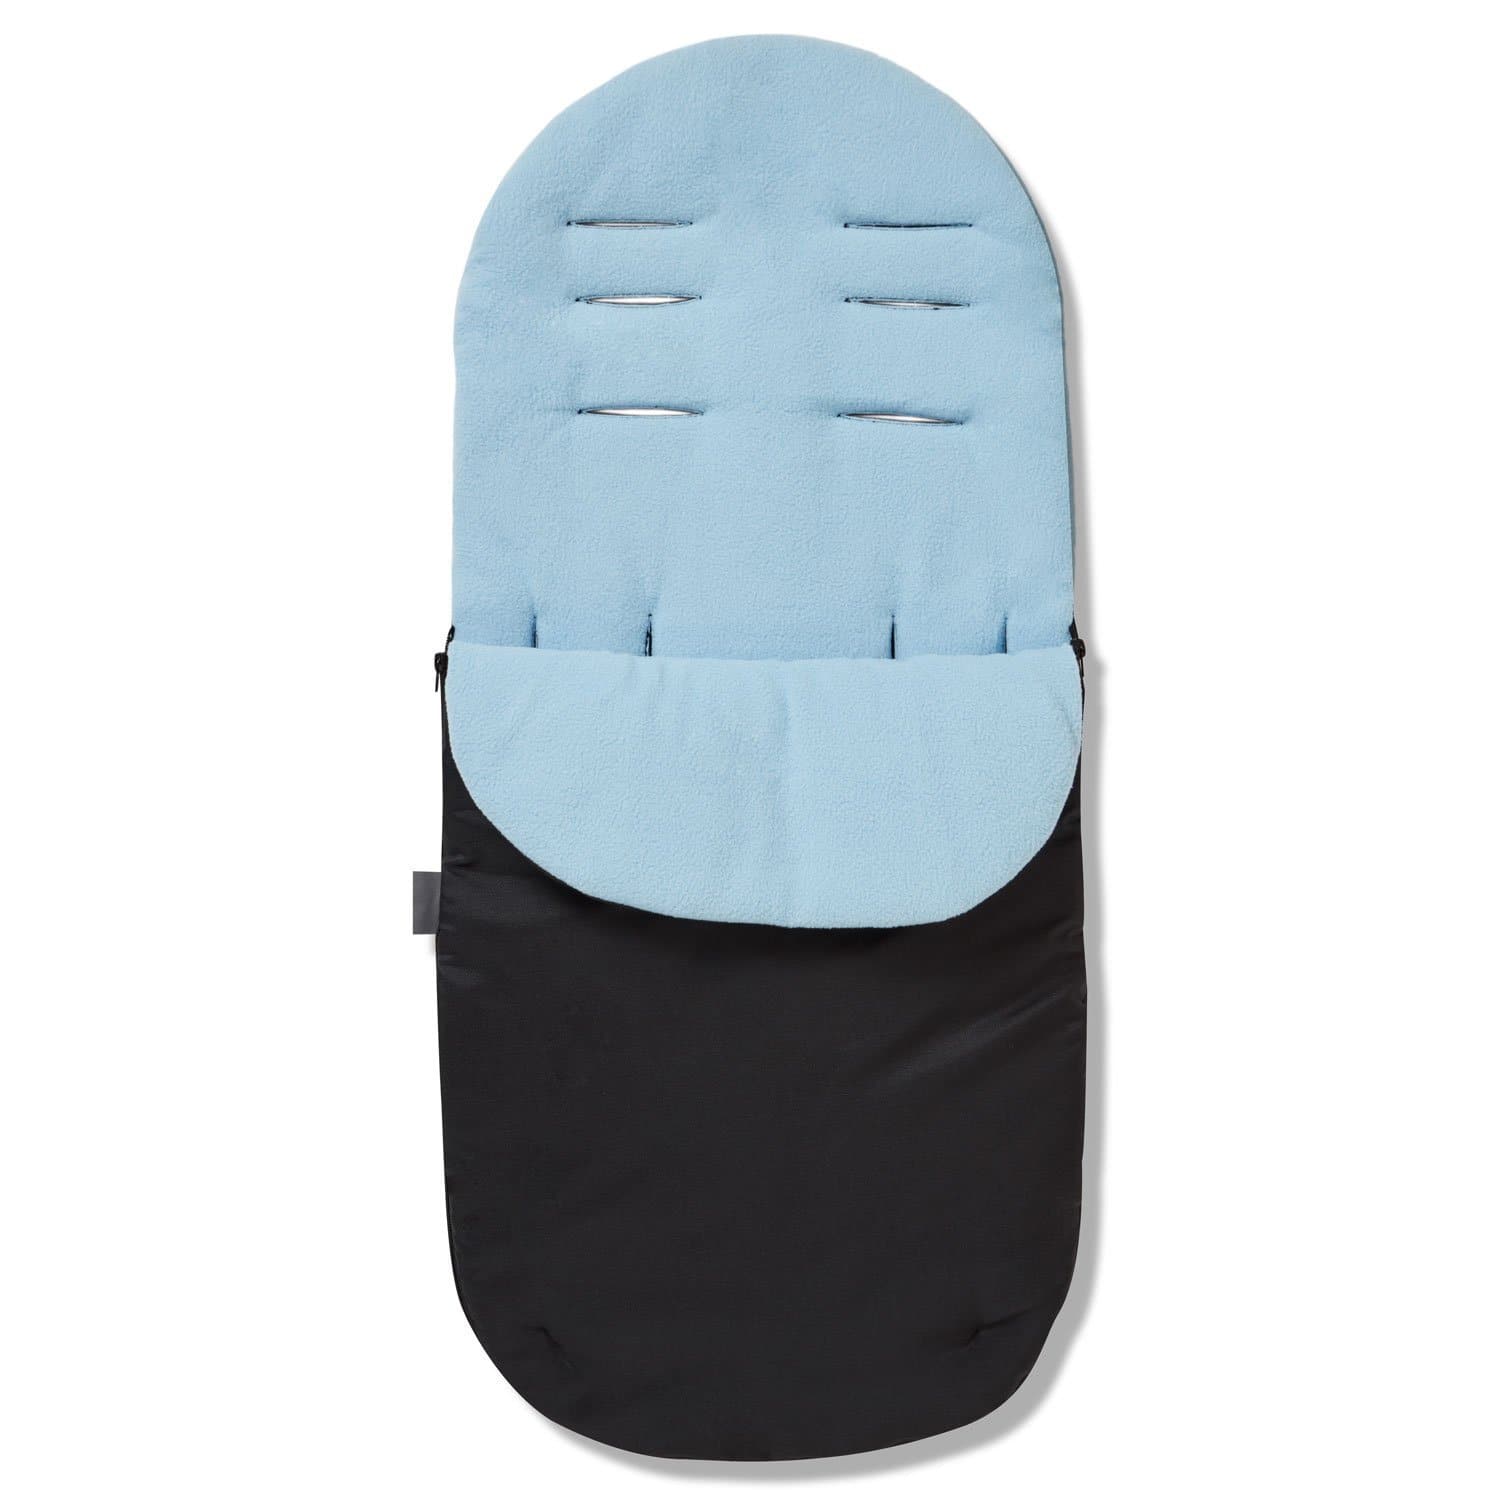 Footmuff / Cosy Toes Compatible with NeoNato - Light Blue / Fits All Models | For Your Little One